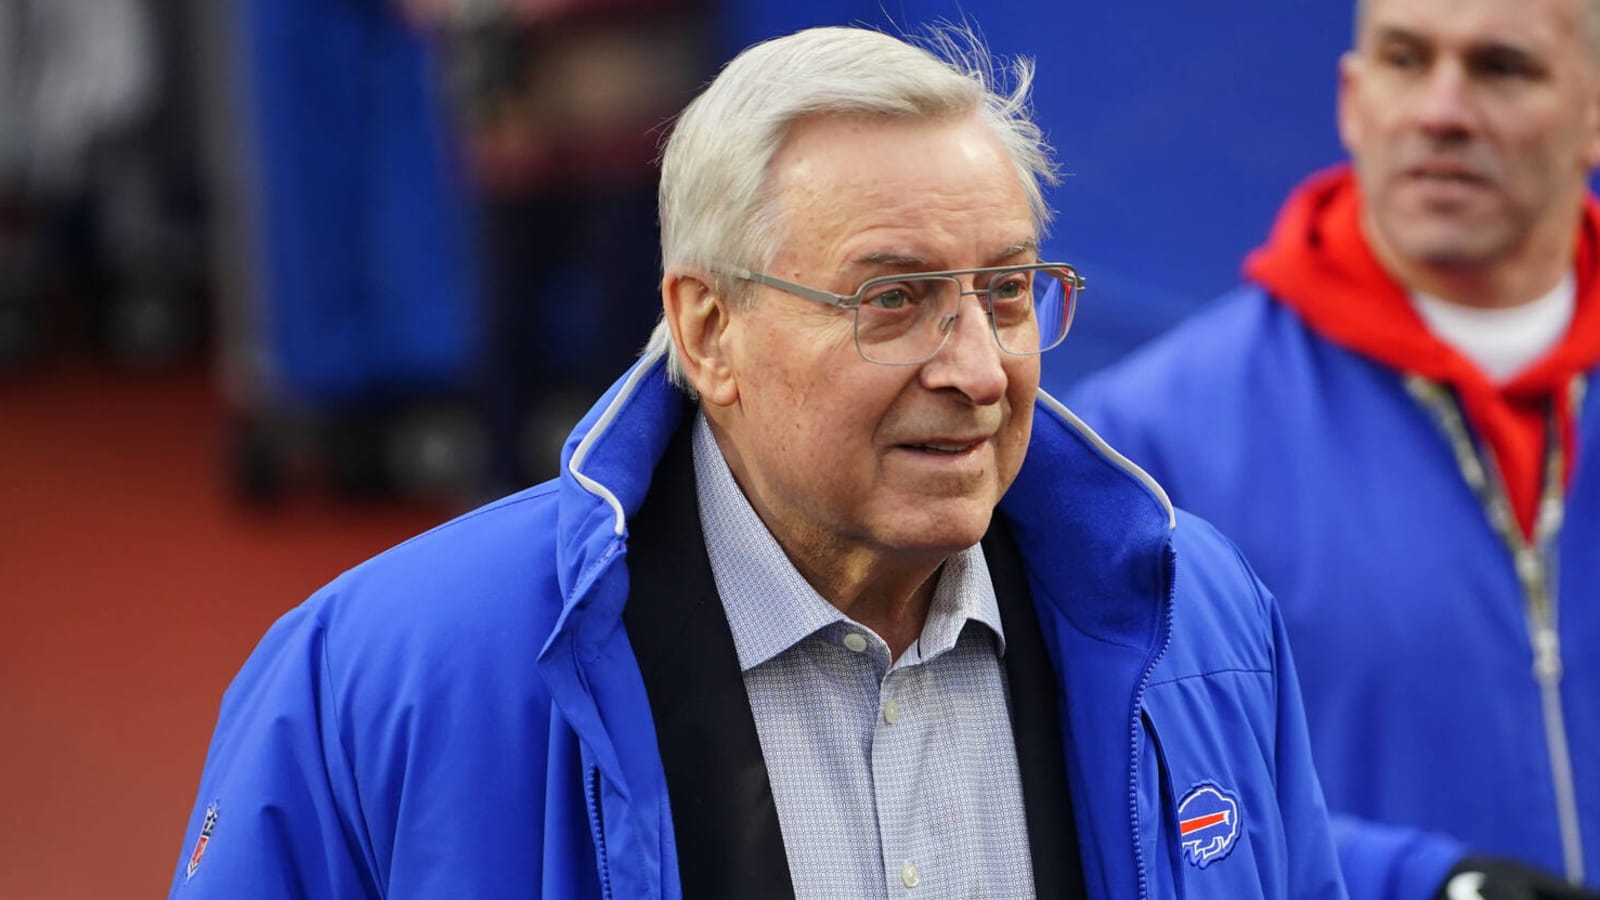 Bills owner puts share of team up for sale